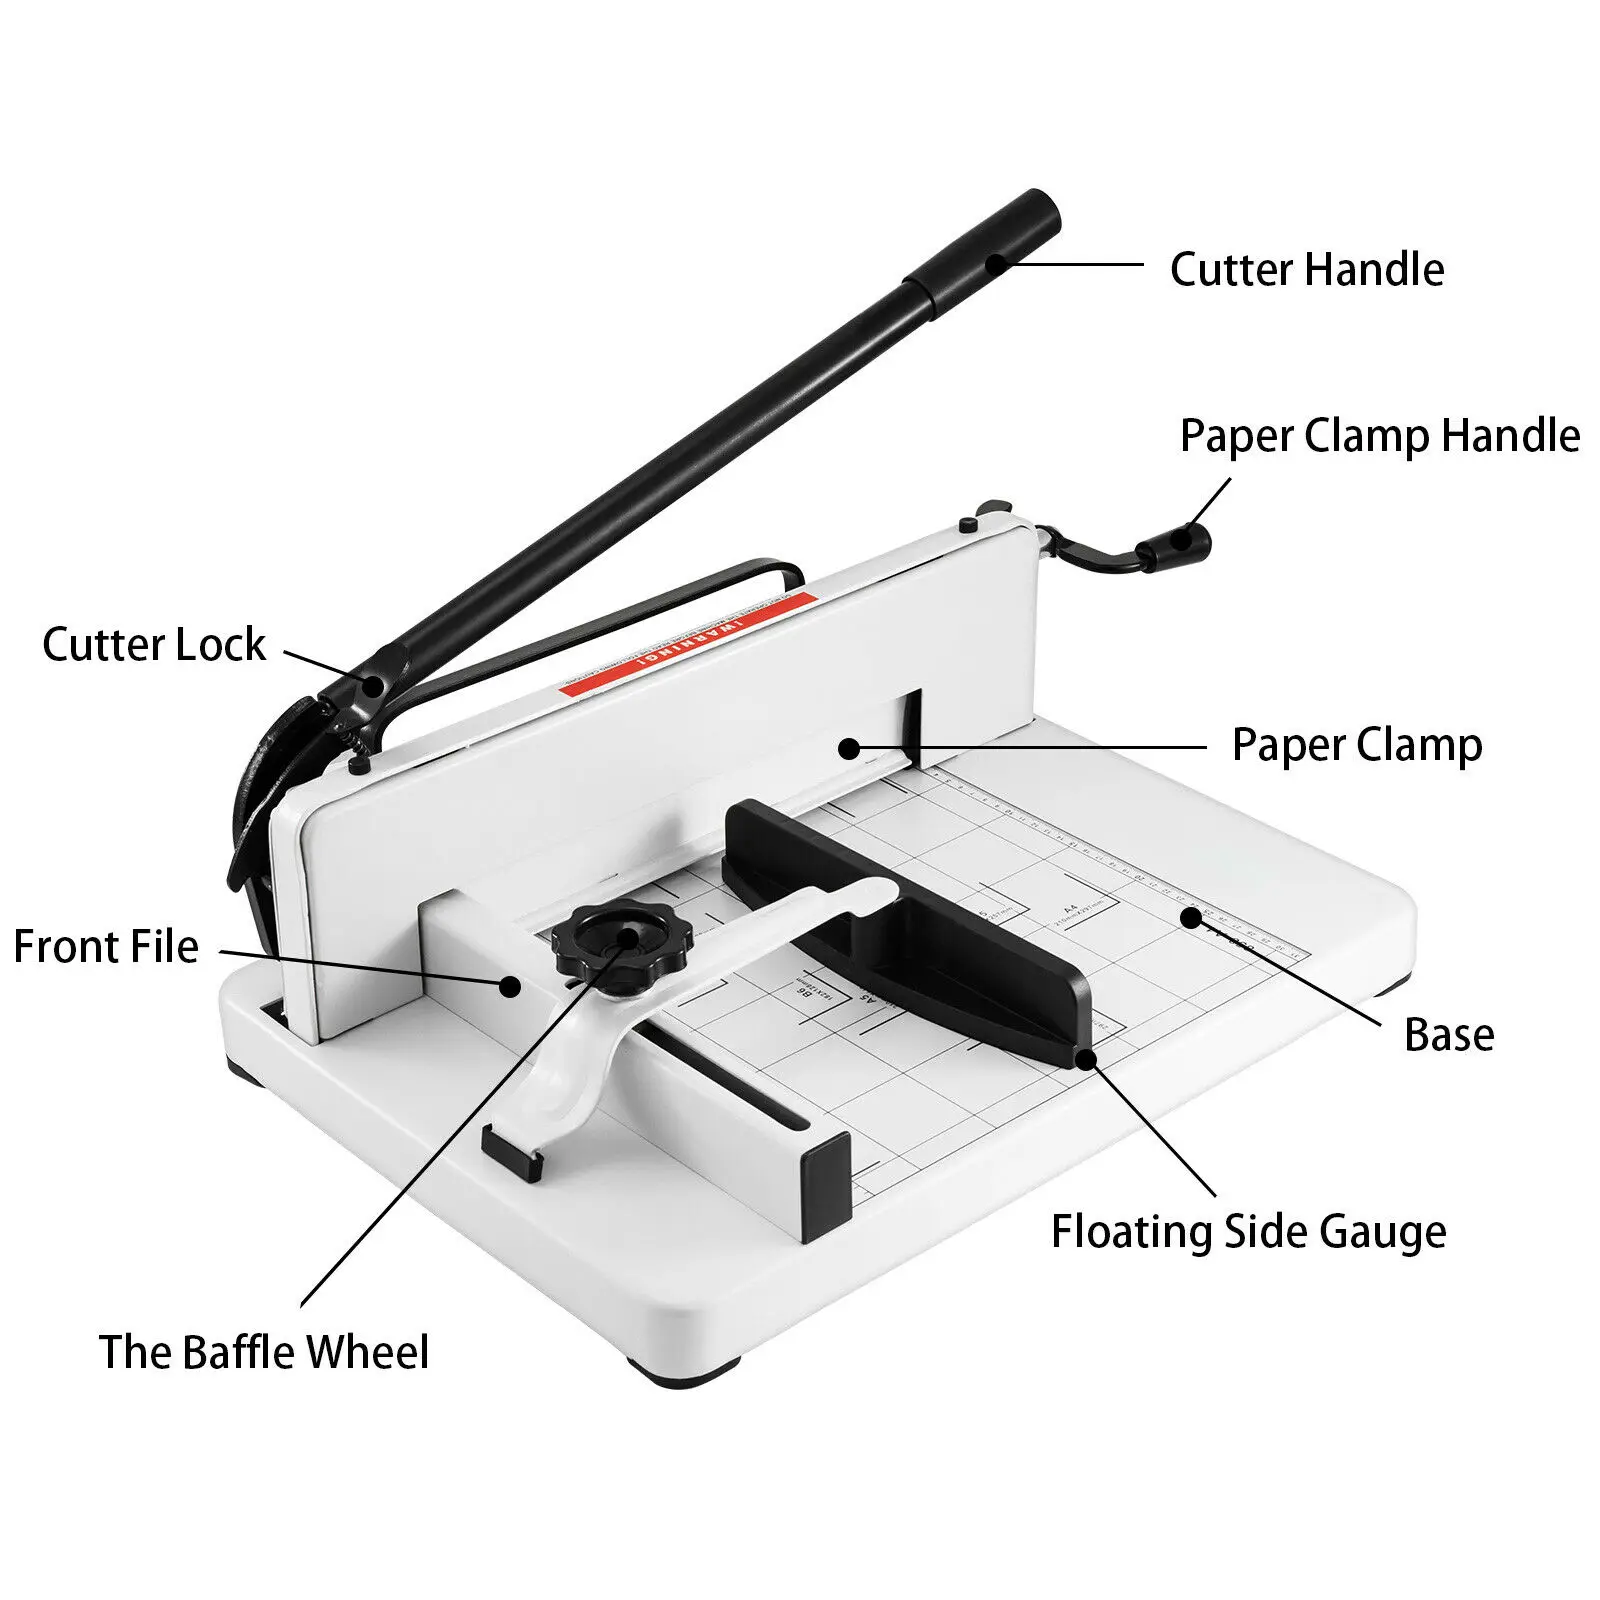 15 Cut Length Vailsa Guillotine Paper Cutter 12 Sheet Capacity A3-B7 Paper Trimmer with Safety Lock 